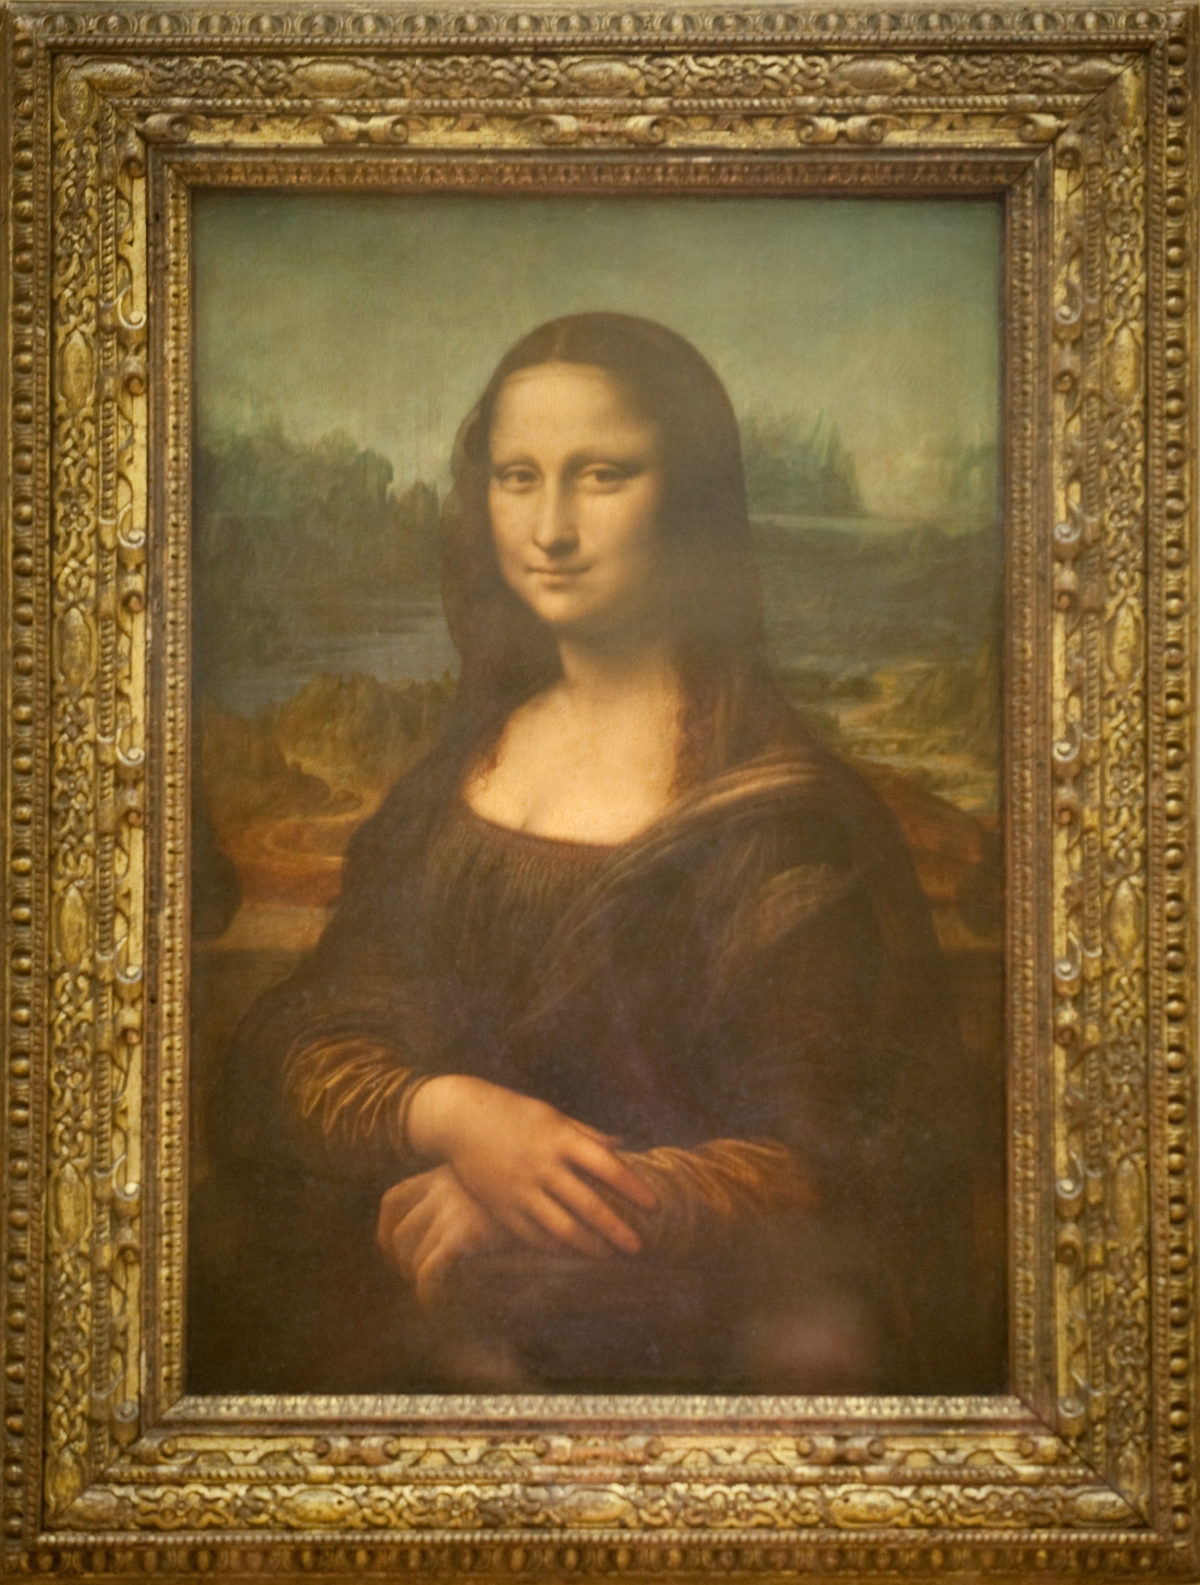 Mona Lisa in gold frame at the Louvre